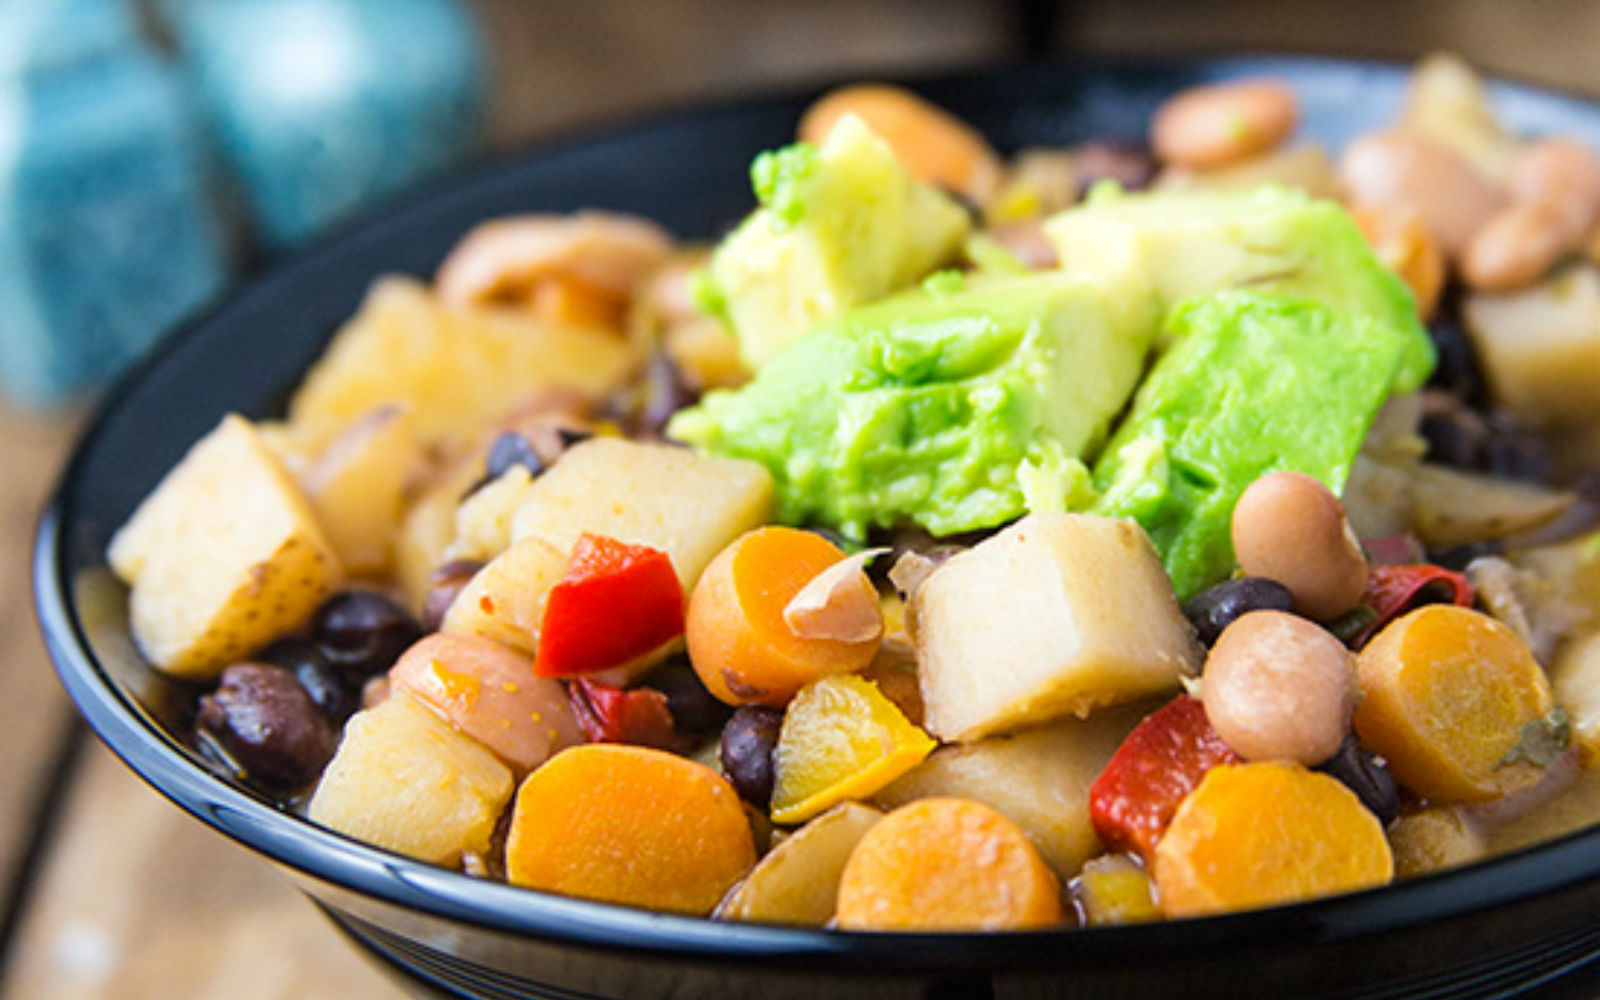 Vegan, Gluten-Free Quick Mexican Stew with Kale and Chipotle and chickpeas and avocado topping